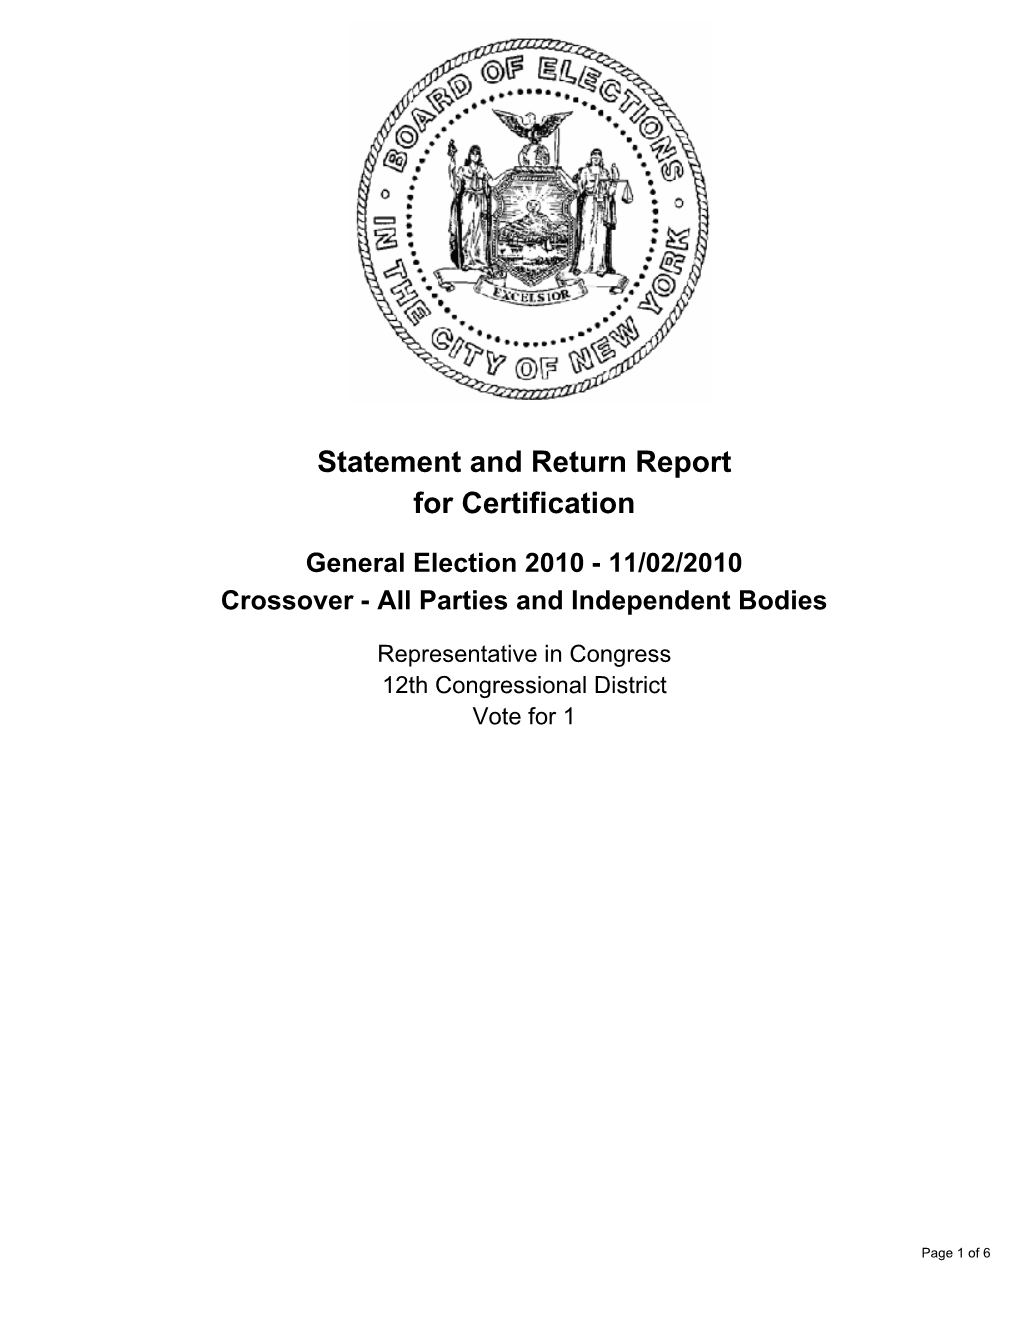 Statement and Return Report for Certification General Election 2010